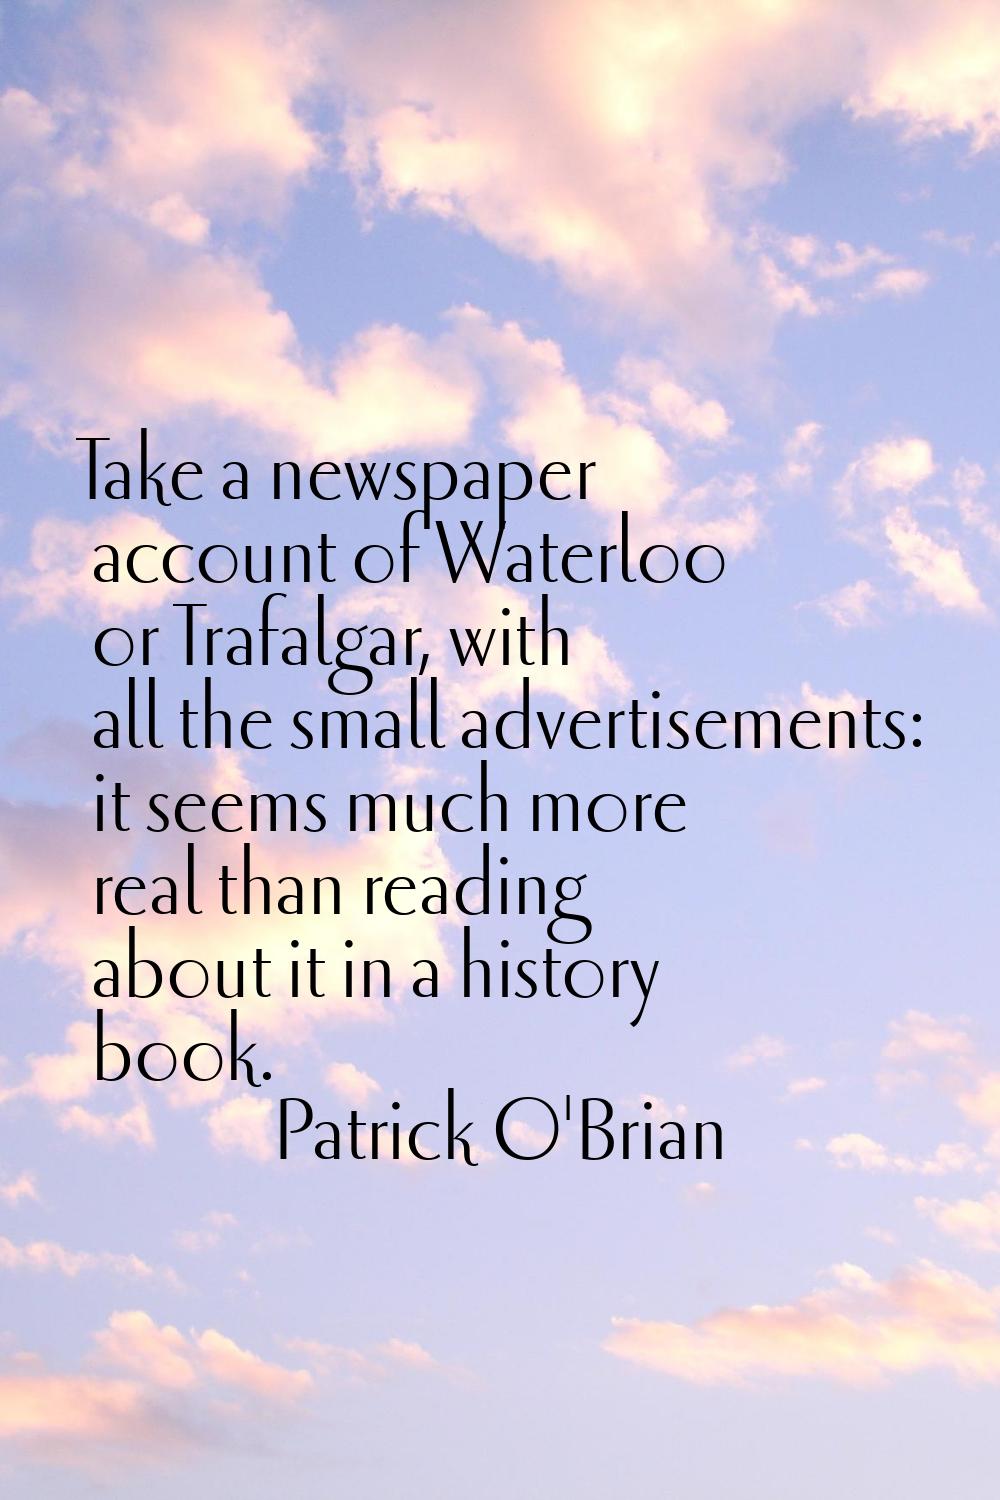 Take a newspaper account of Waterloo or Trafalgar, with all the small advertisements: it seems much